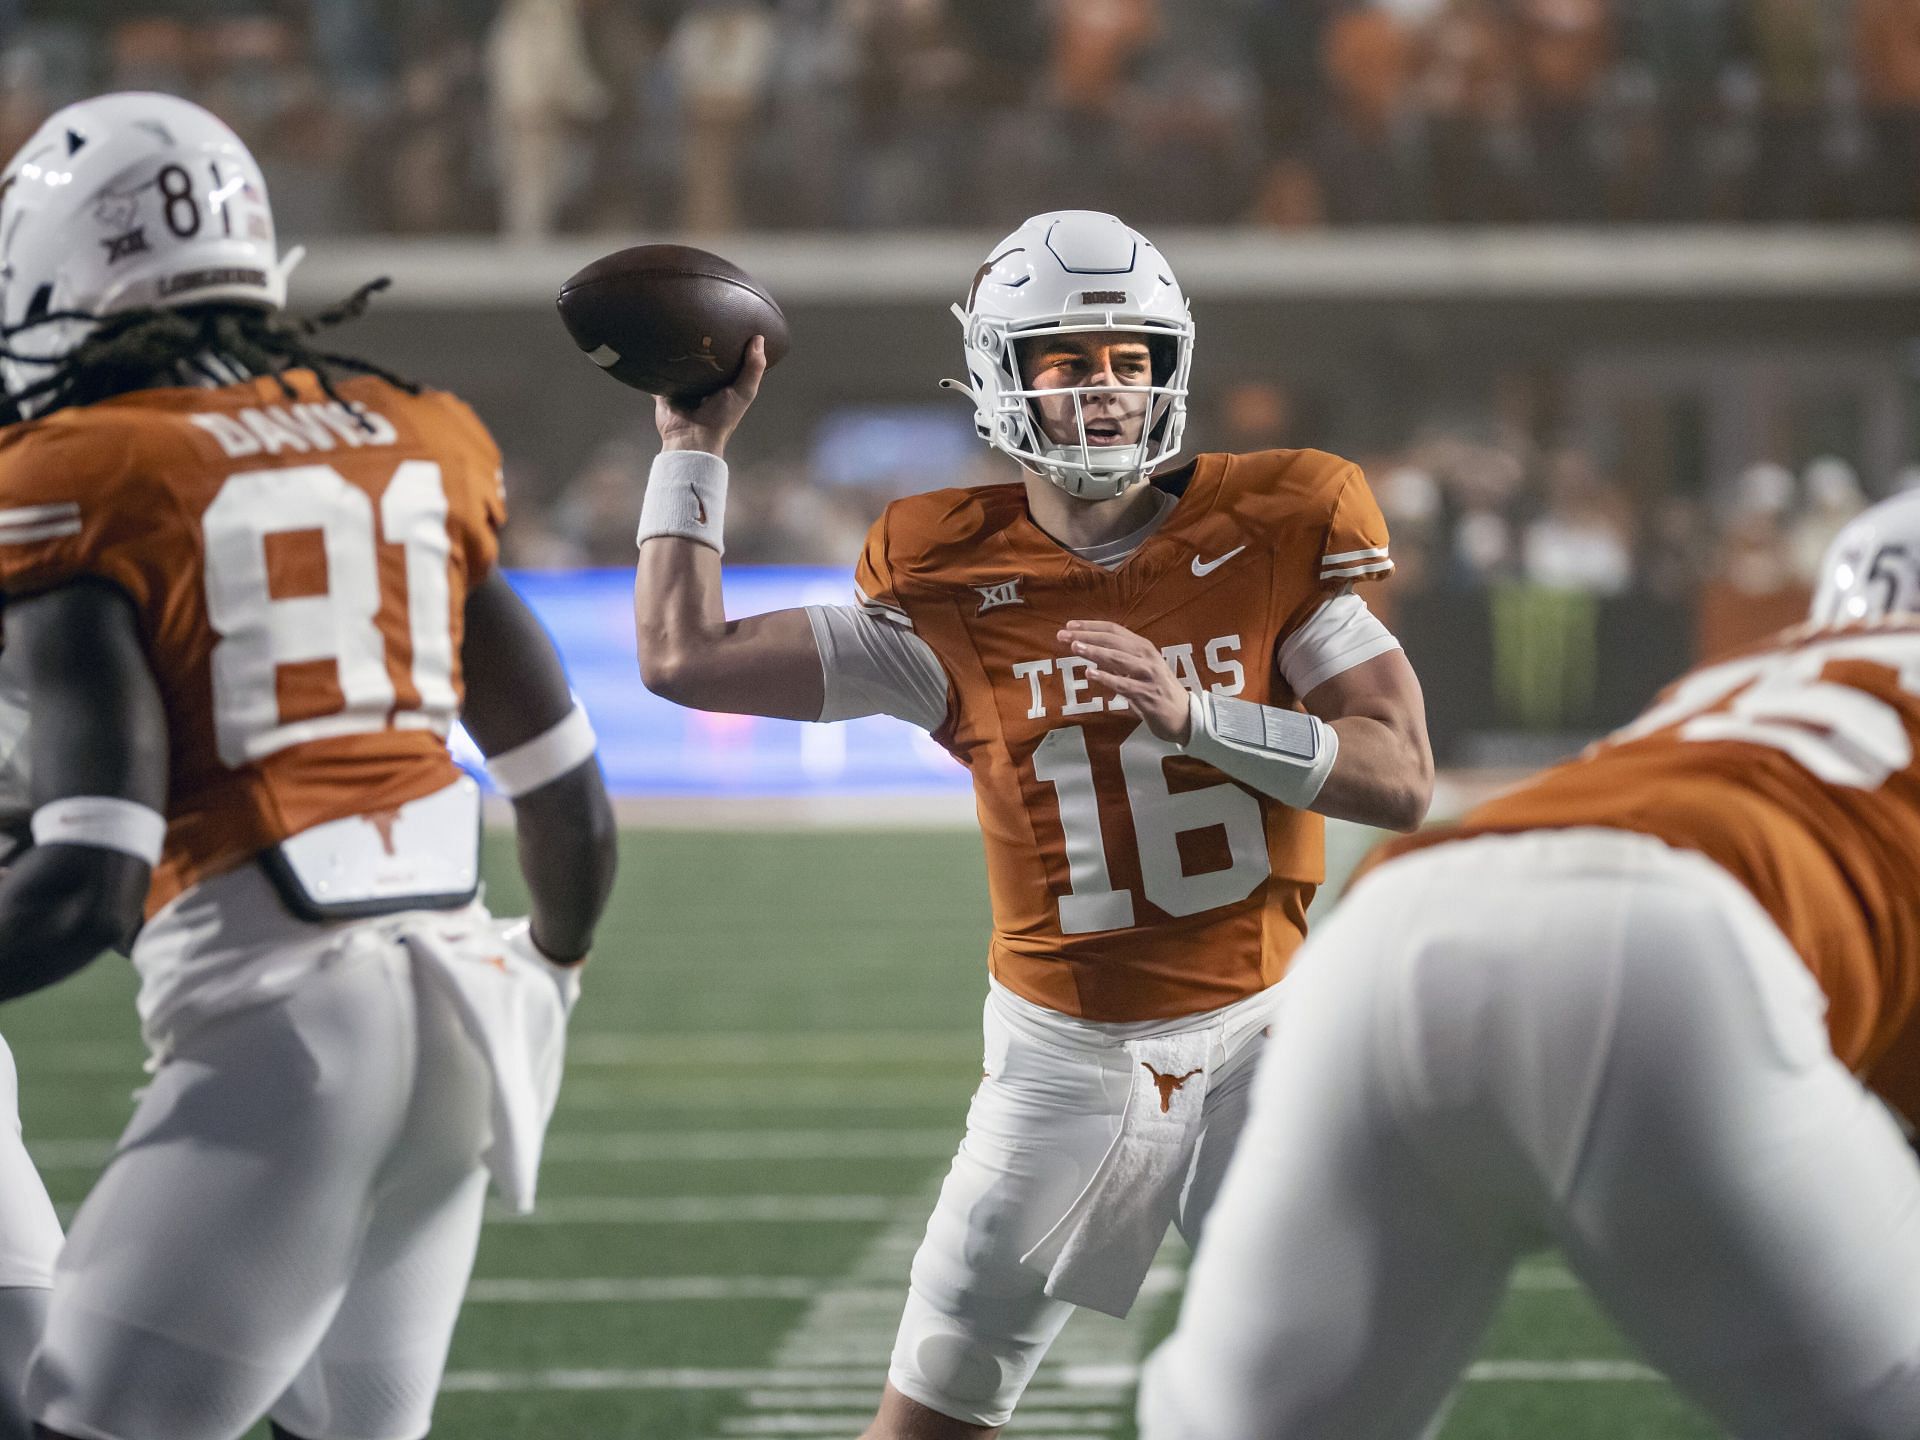 Texas will play Oklahoma State in the Big 12 Championship